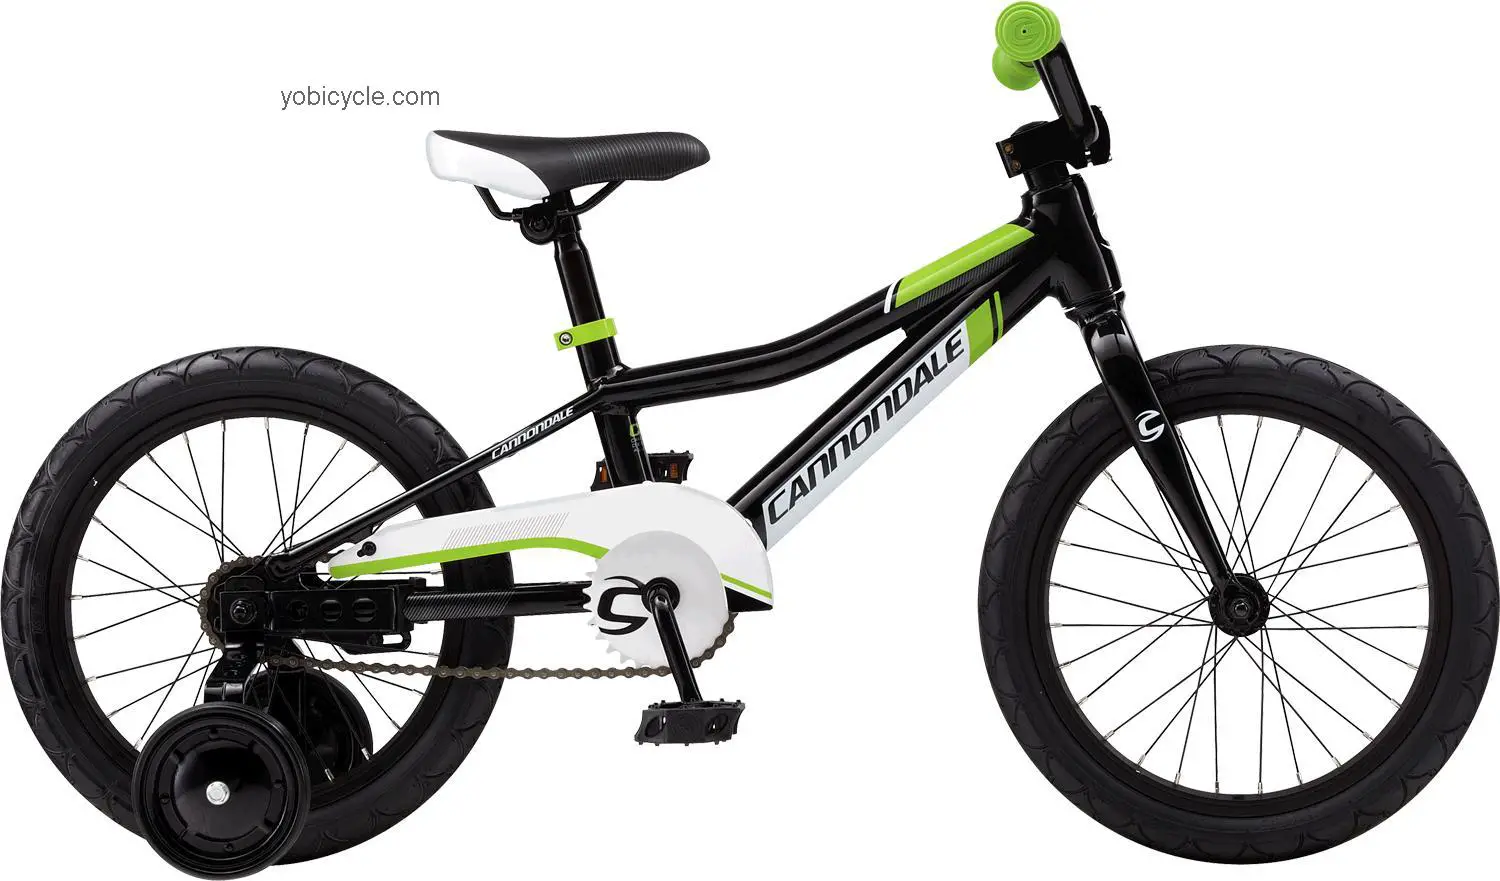 Cannondale Boys 16 Trail 1 Speed 2013 comparison online with competitors